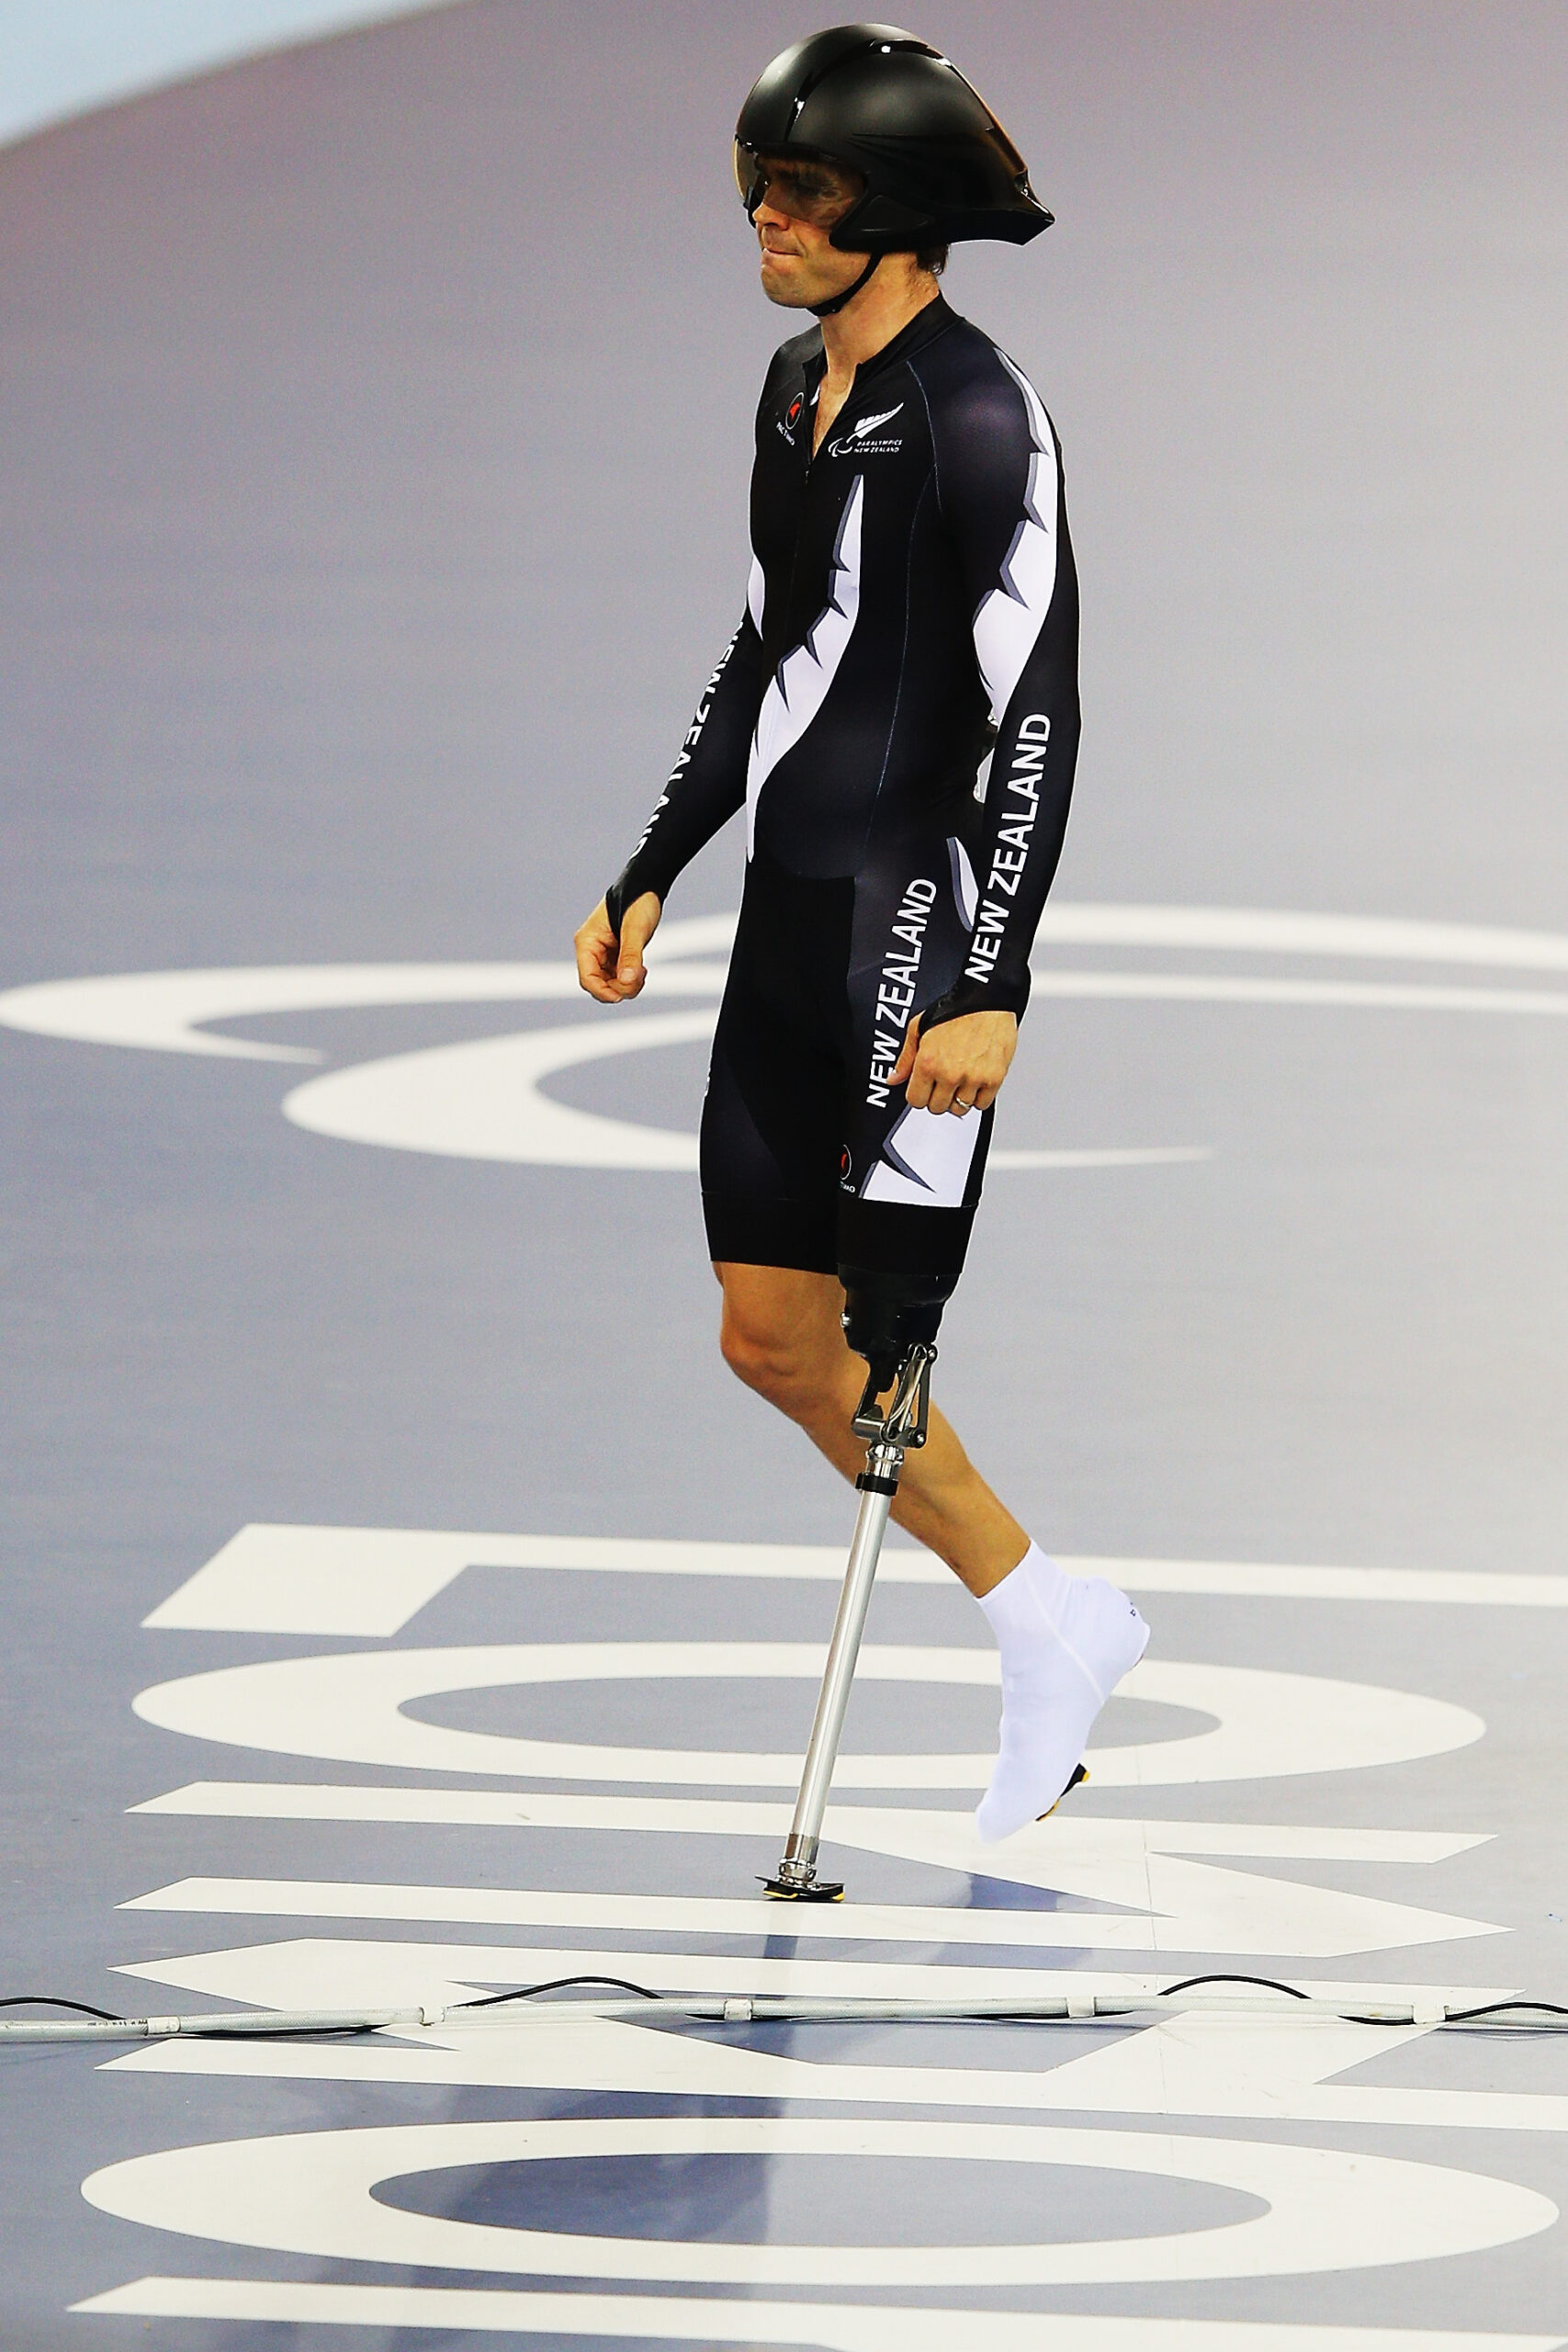 Nathan wearing helmet and cycling prosthetic walks over London 2012 on floor